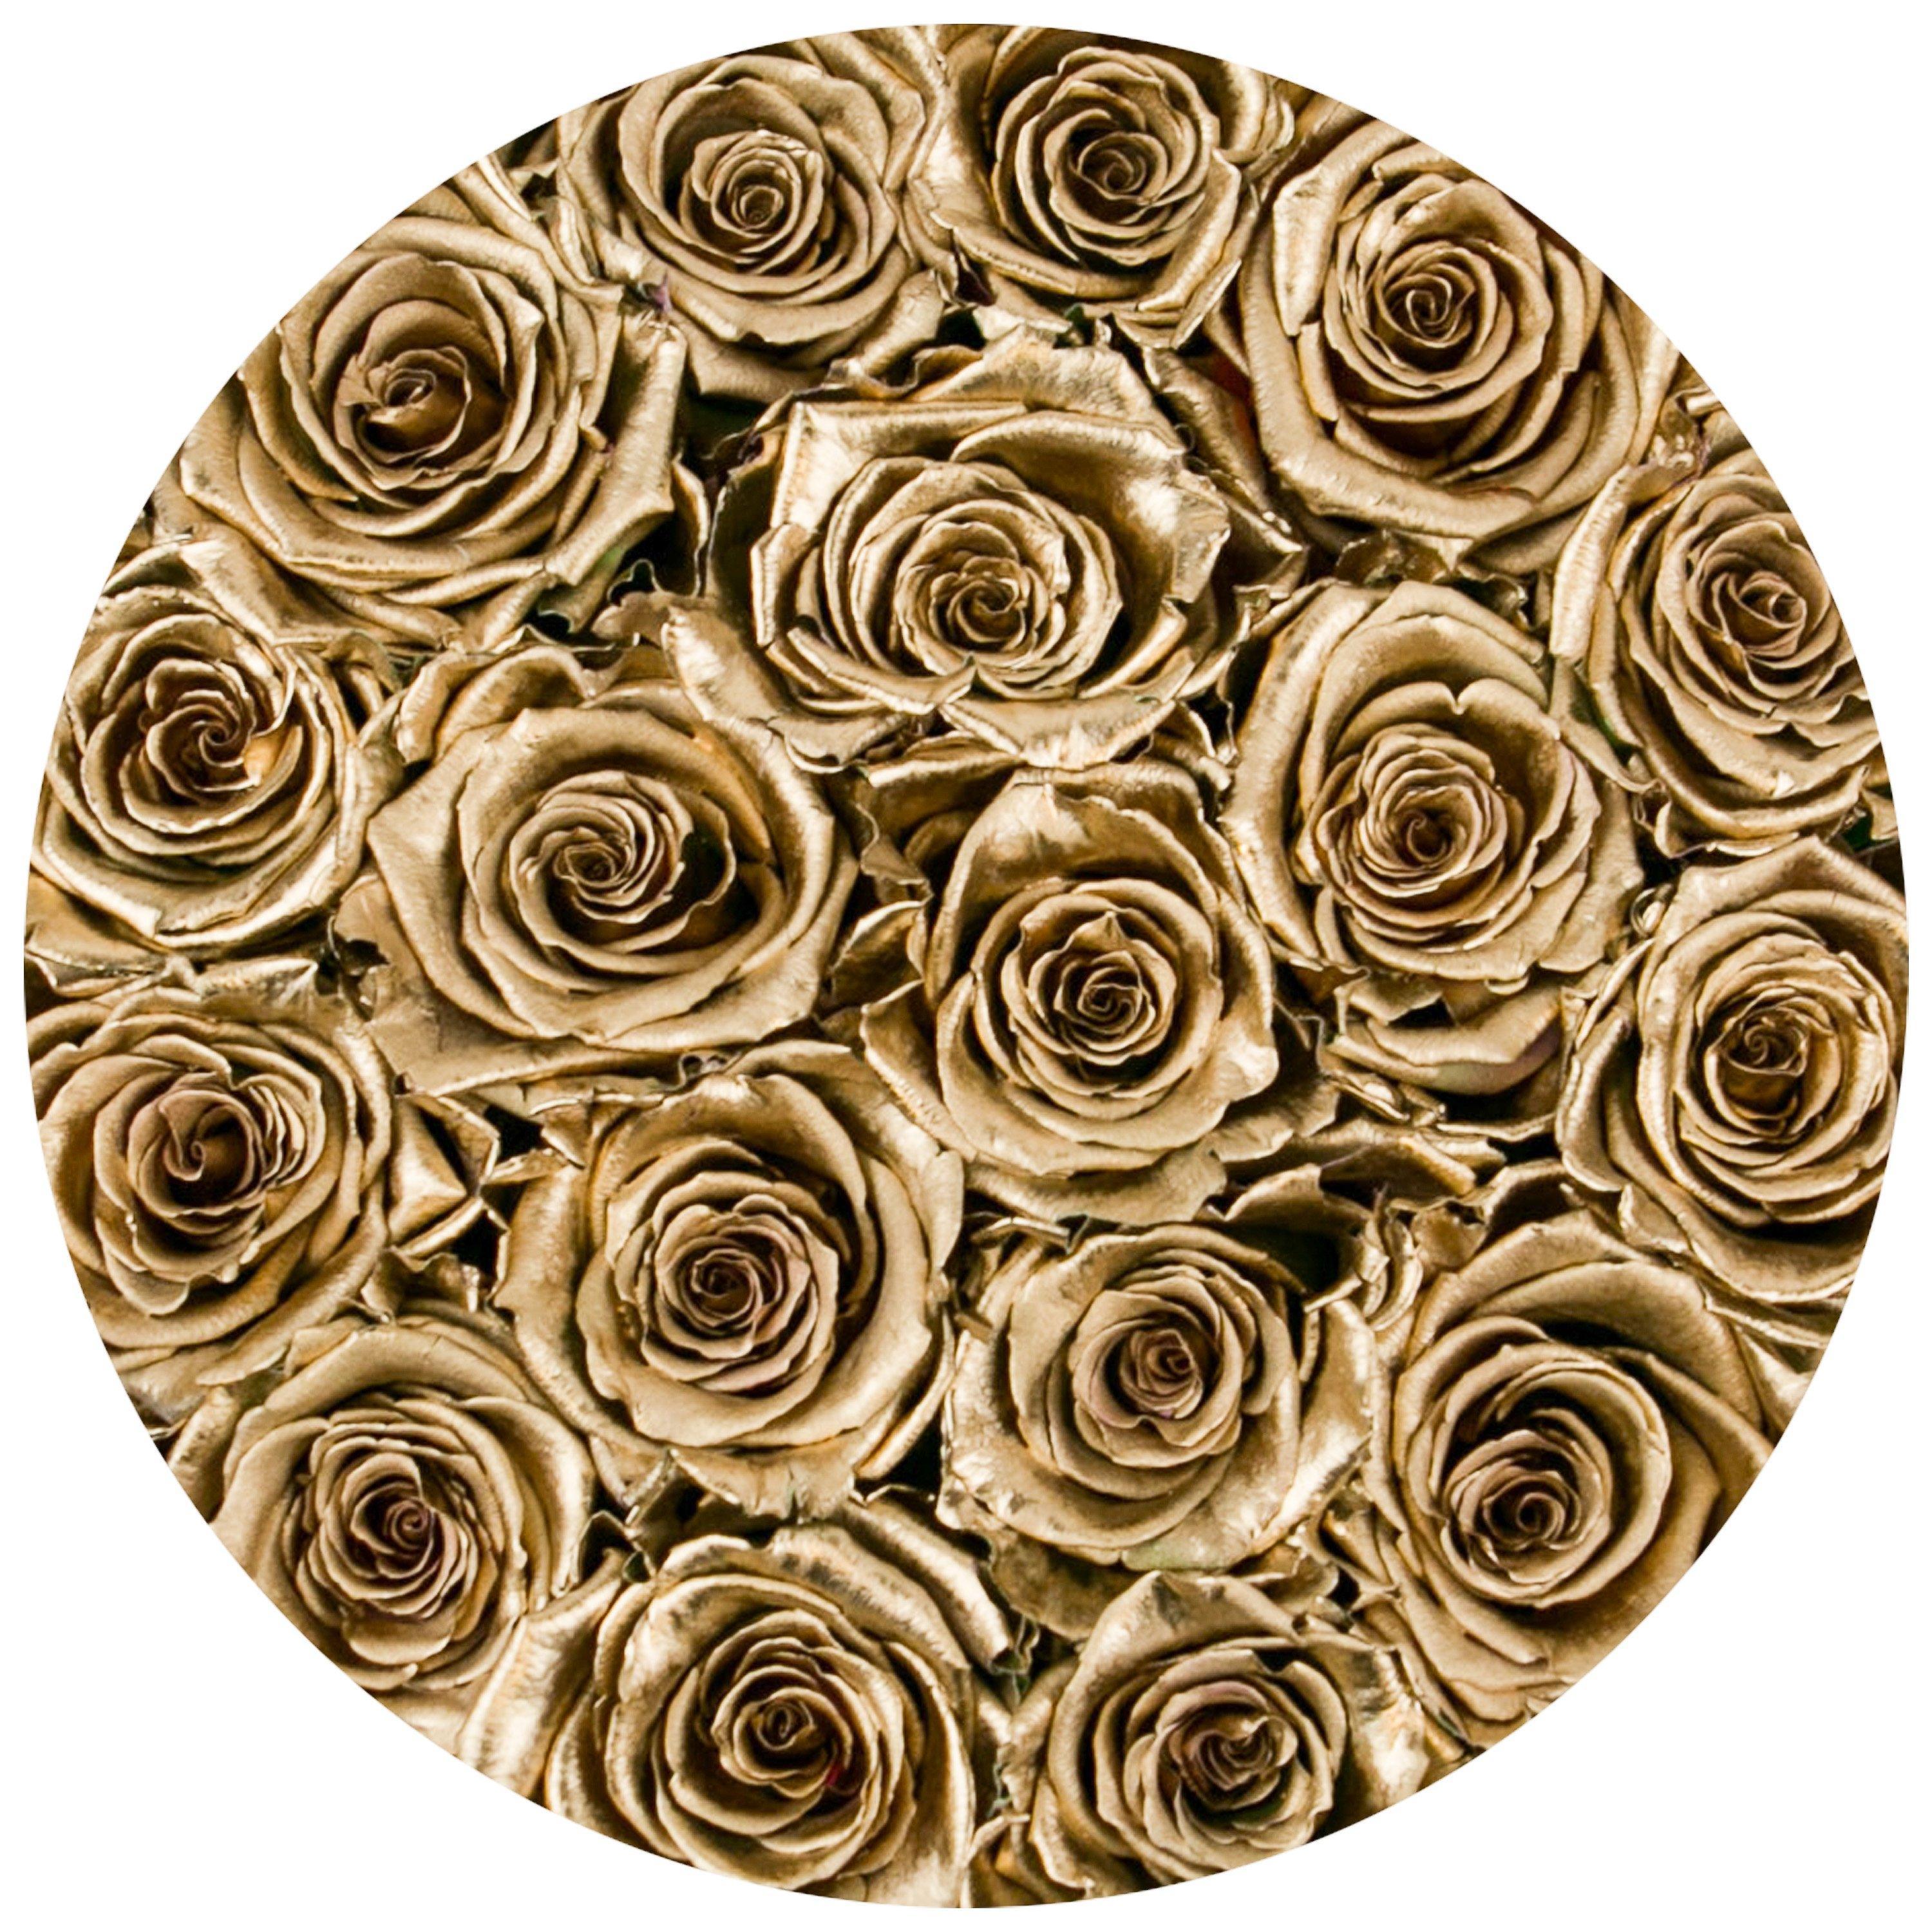 classic round box - "LOVE" - gold roses gold eternity roses - the million roses